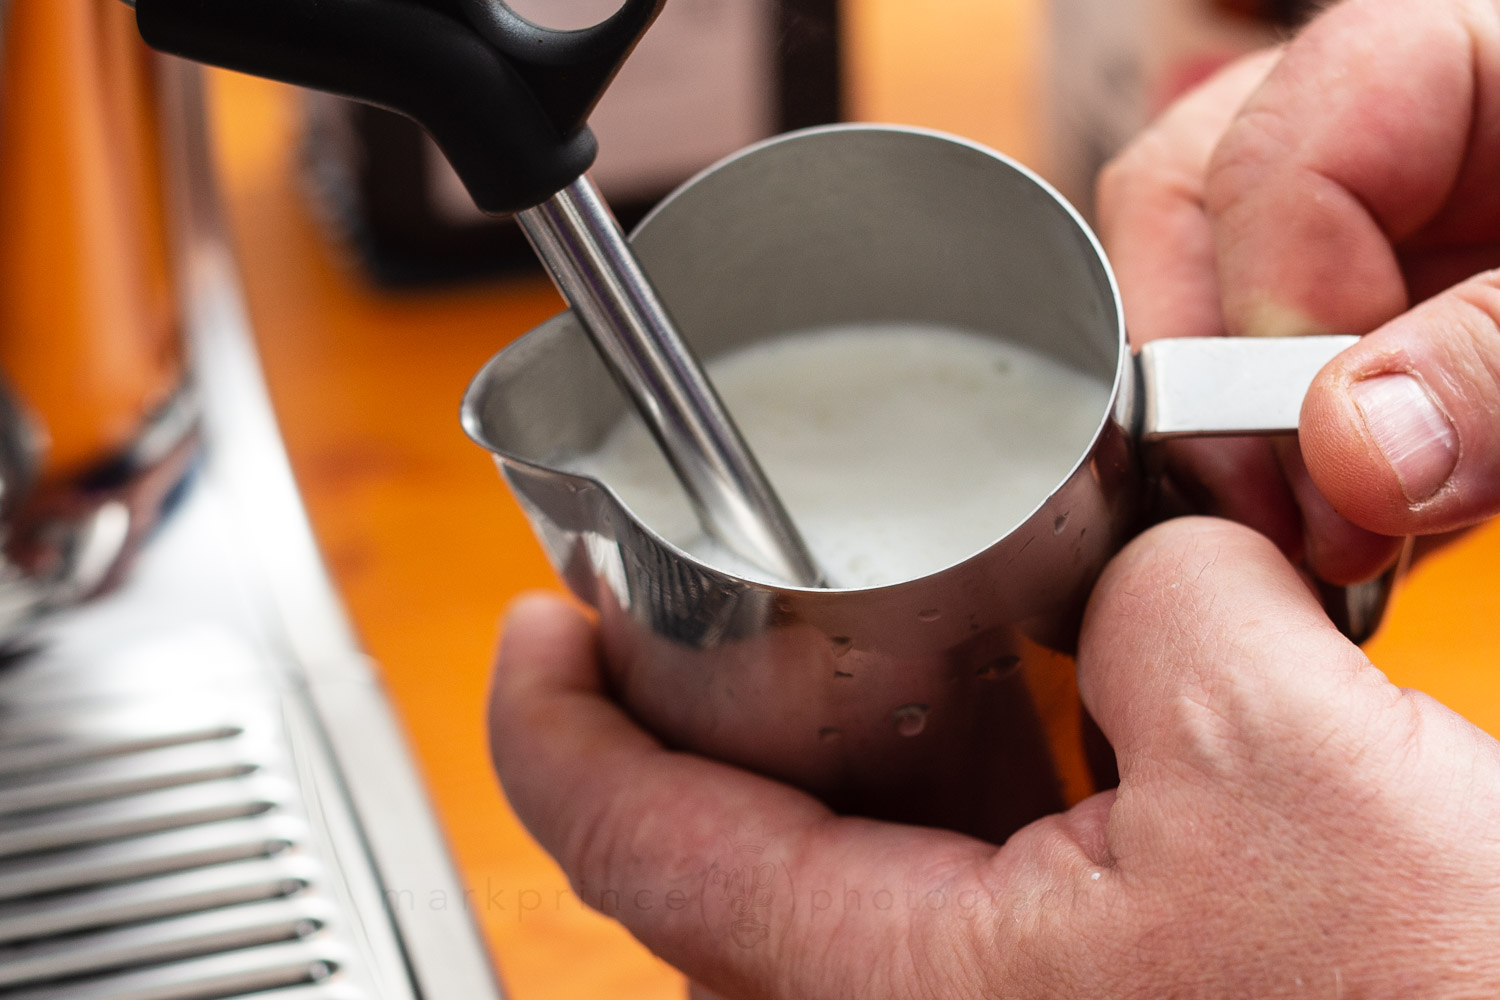 How To Steam Milk: 6 Step Steamed Milk Guide